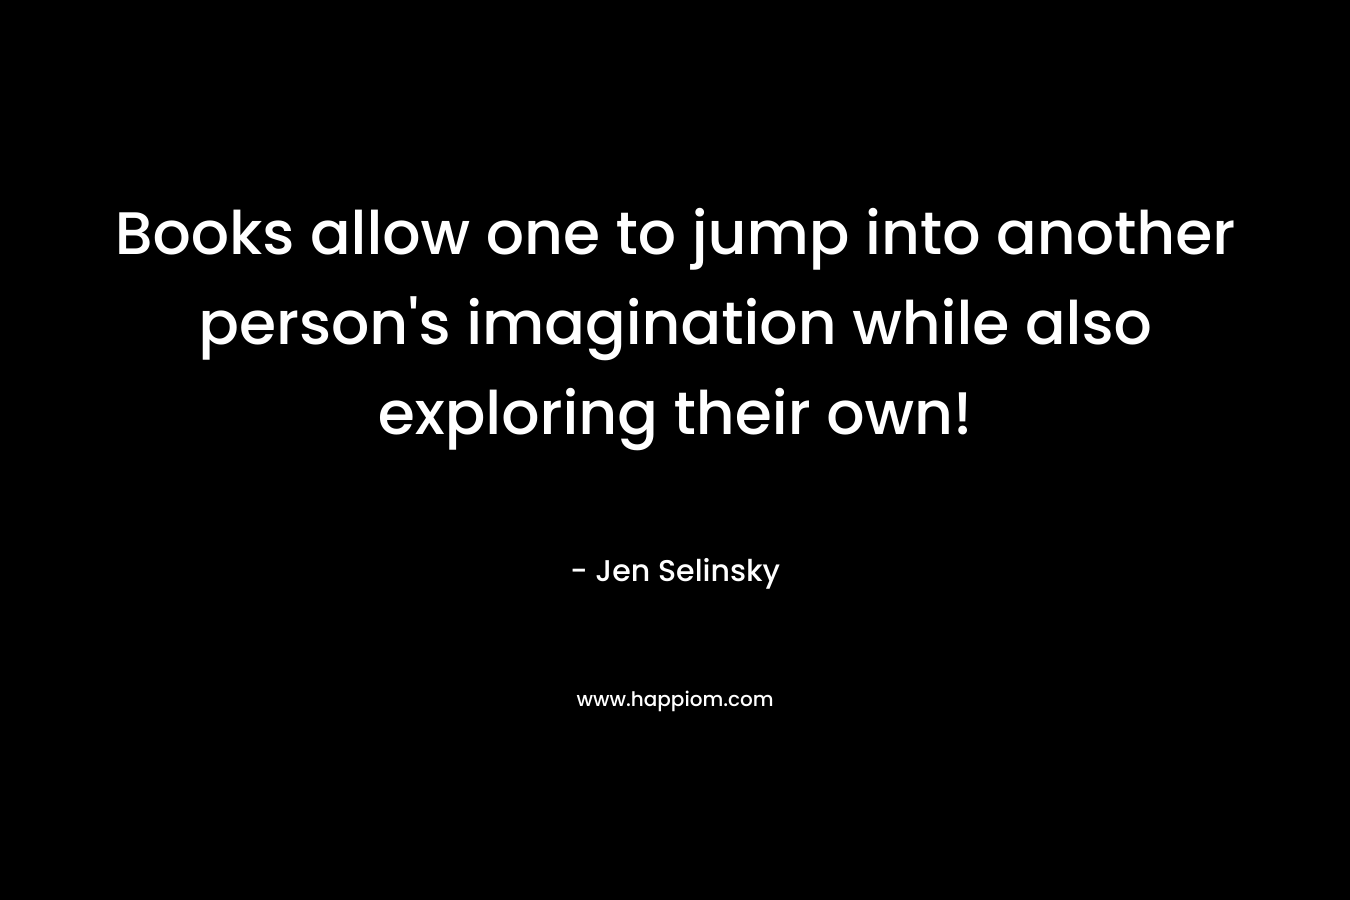 Books allow one to jump into another person's imagination while also exploring their own!